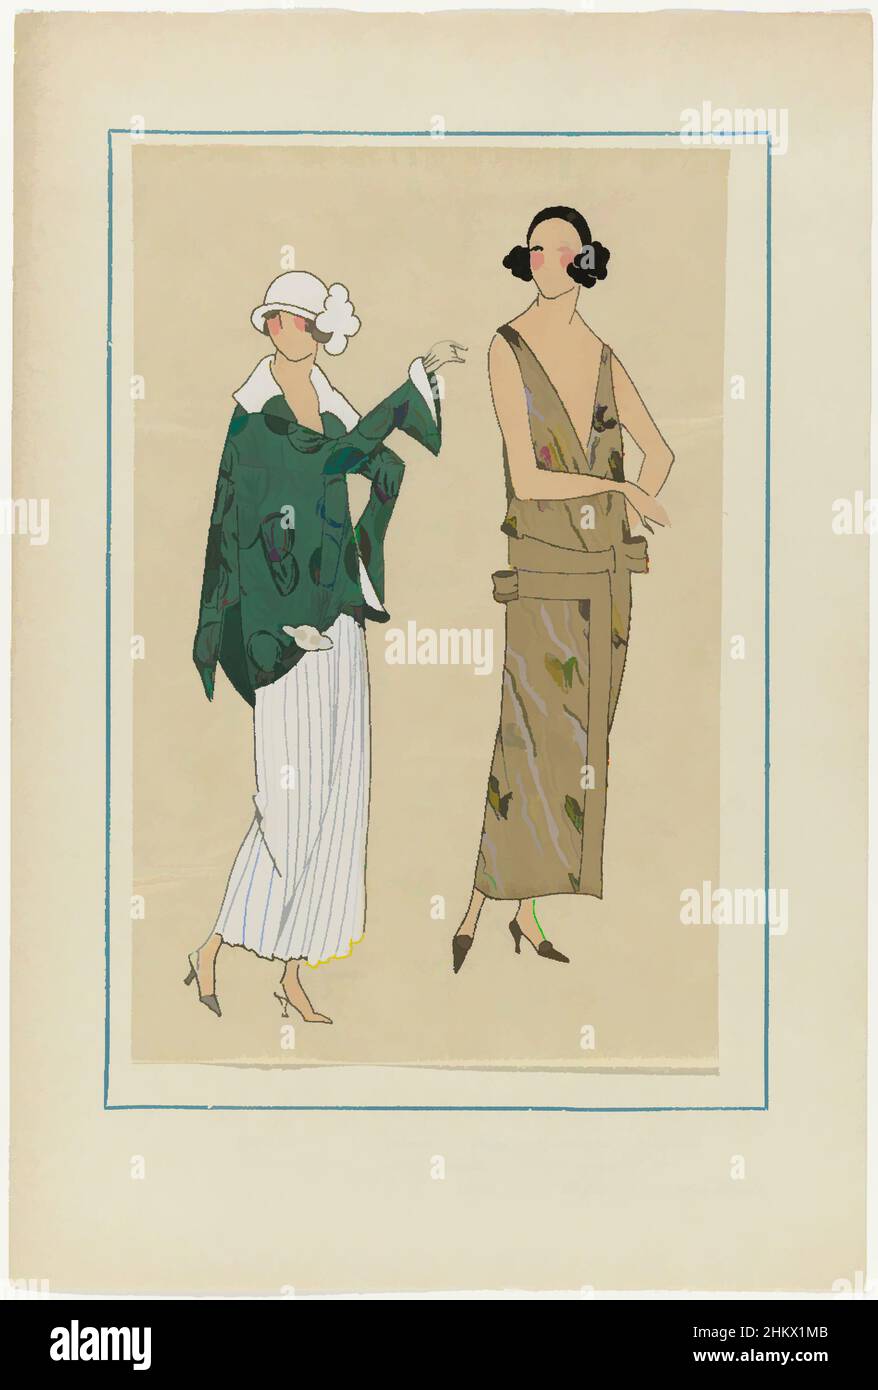 Art inspired by Très Parisien, 1923, No 5: 11.- NEPTUNE..., 1. A paletot for the beach in the model Neptune. Pleated skirt. 2. Evening dress of crepe épinglé, Vague argentée. Fabrics from Réal. Accessories: cloche (pot hat), pumps. Print from the fashion magazine Très Parisien (1920-, Classic works modernized by Artotop with a splash of modernity. Shapes, color and value, eye-catching visual impact on art. Emotions through freedom of artworks in a contemporary way. A timeless message pursuing a wildly creative new direction. Artists turning to the digital medium and creating the Artotop NFT Stock Photo